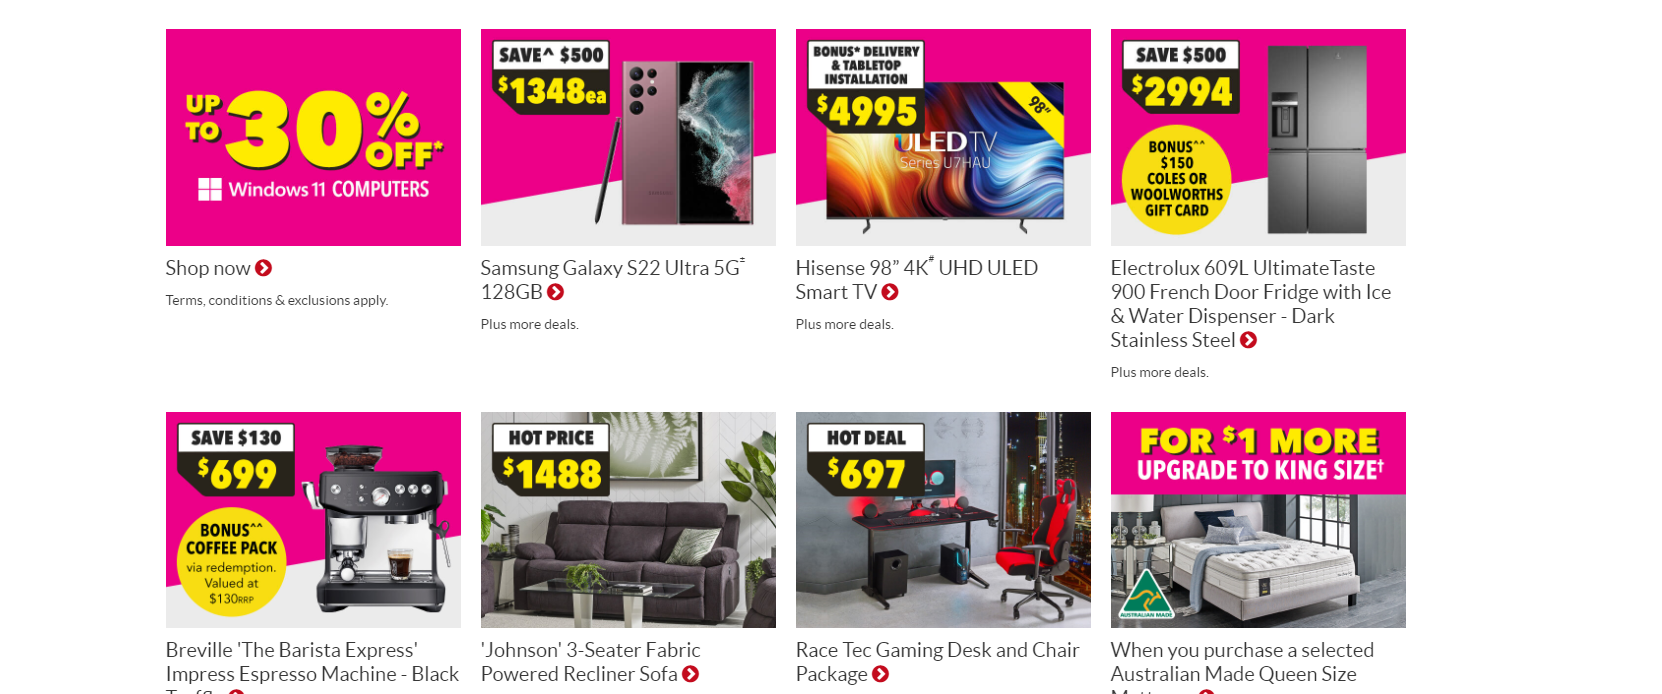 Harvey Norman Black Friday - 25% OFF bathroom furniture, Up to 50% OFF rugs